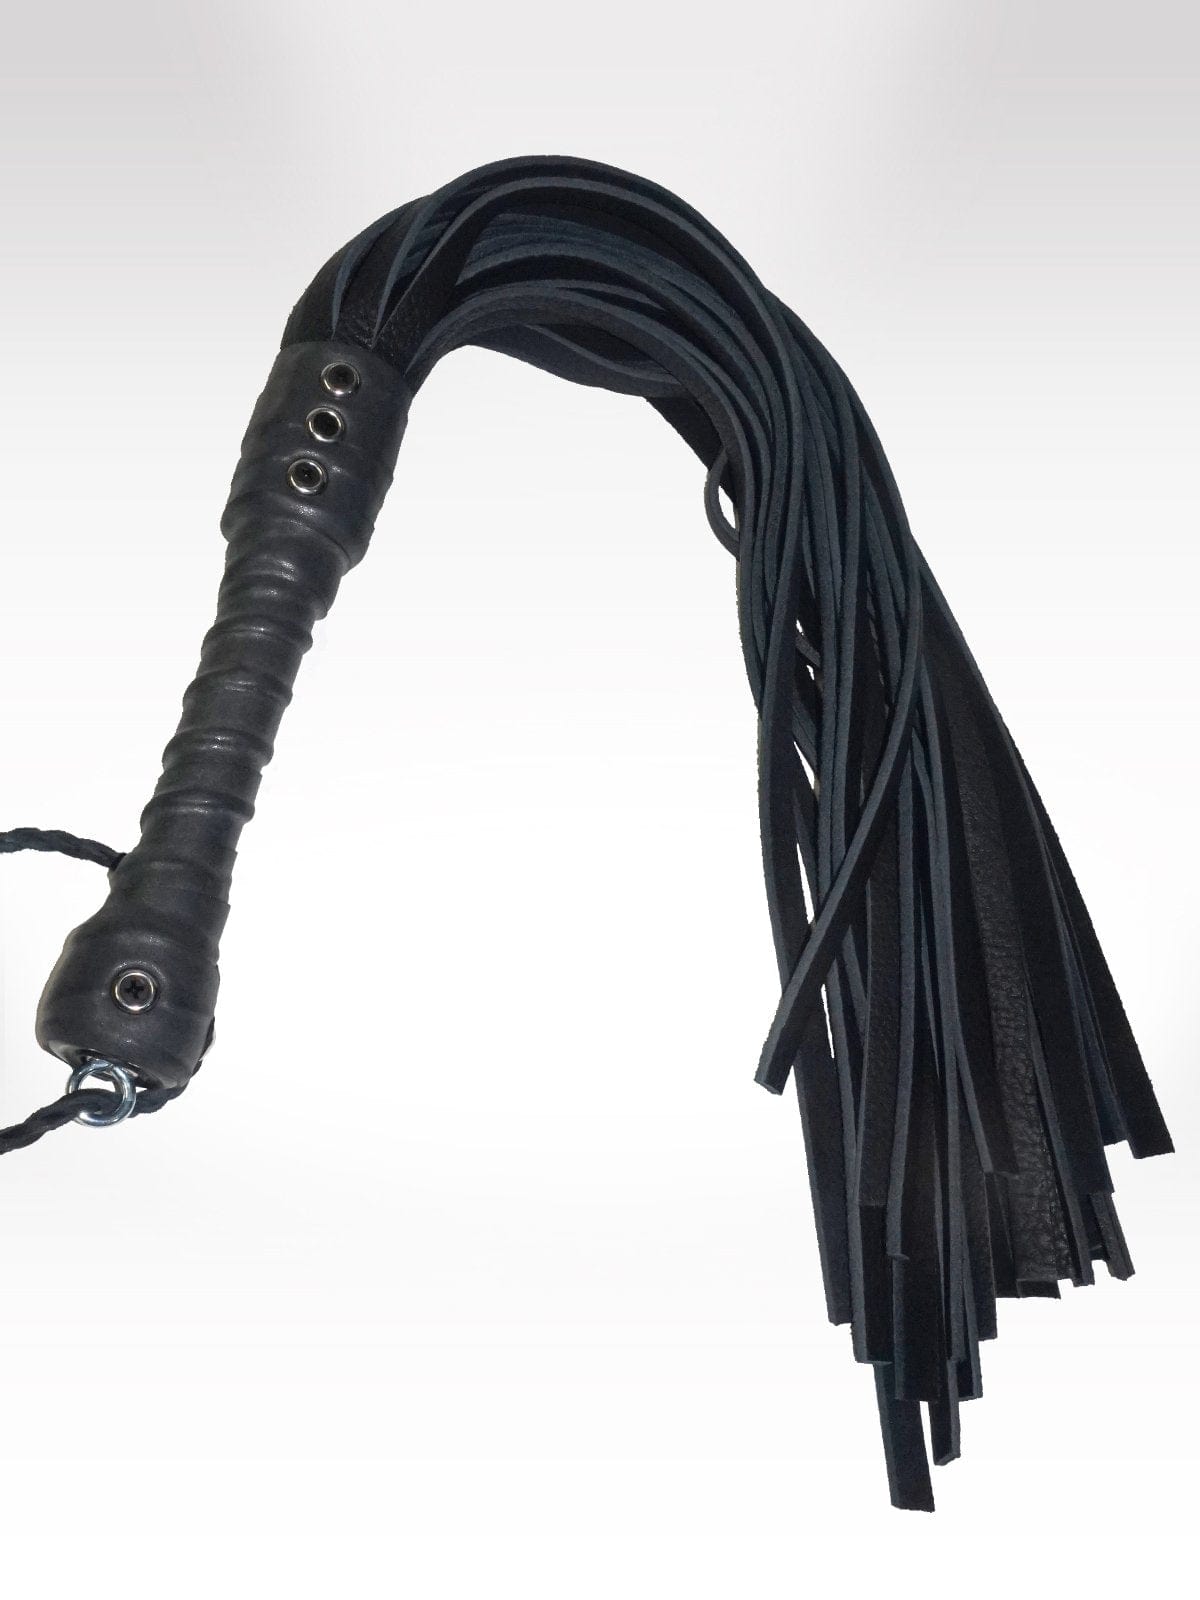 DELUXE ALL-BUFFALO HIDE HEAVY STING FULL-SIZE FLOGGER